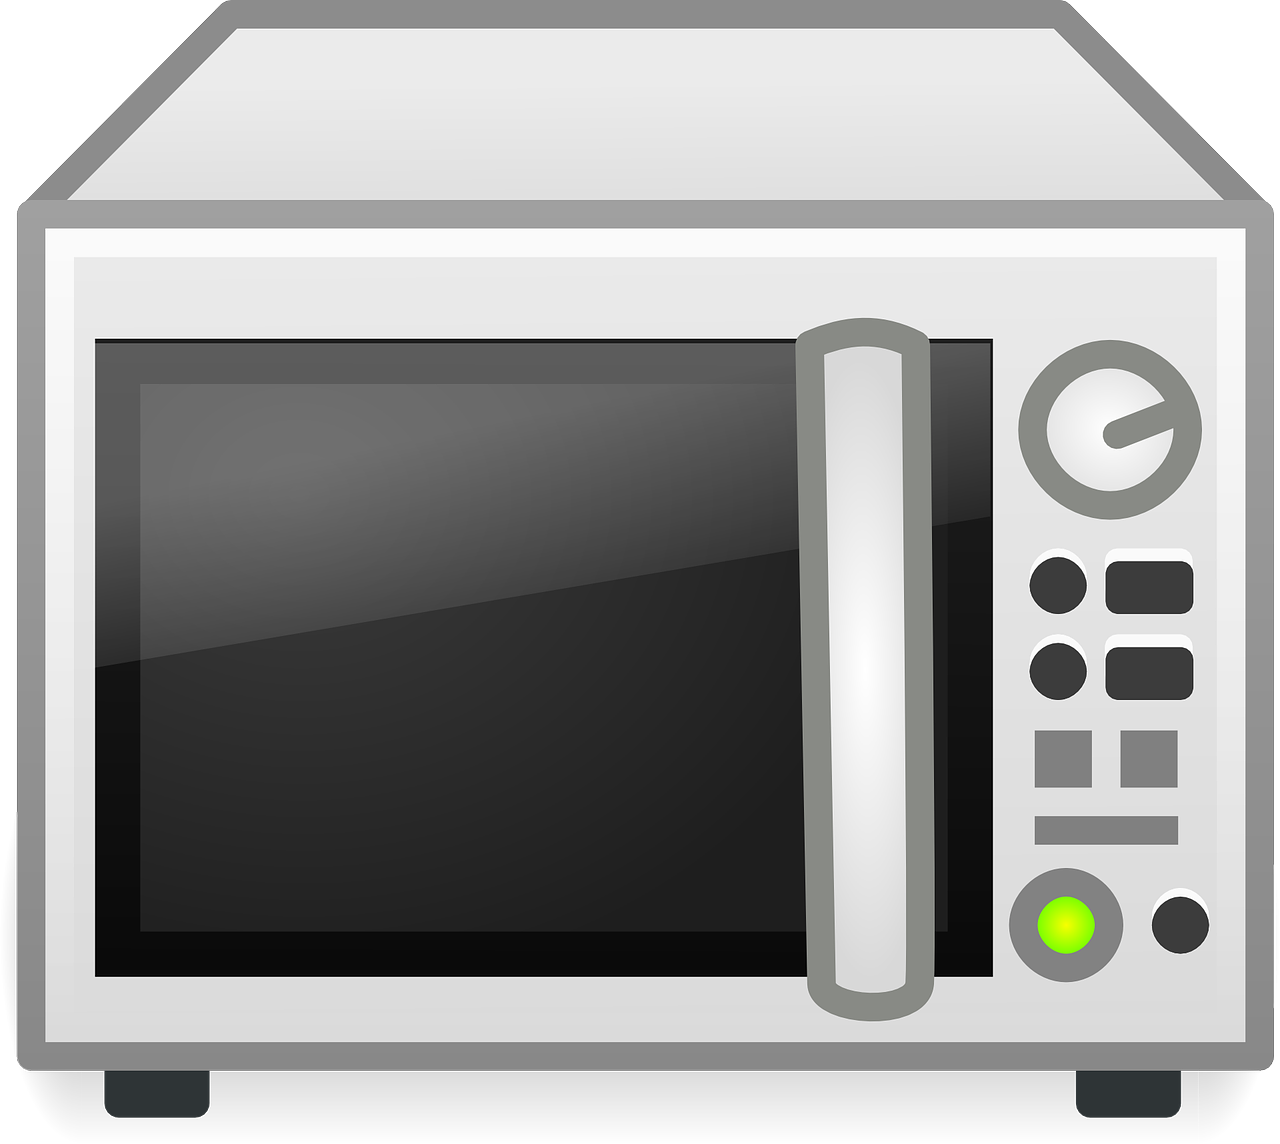 microwave oven wireless free photo